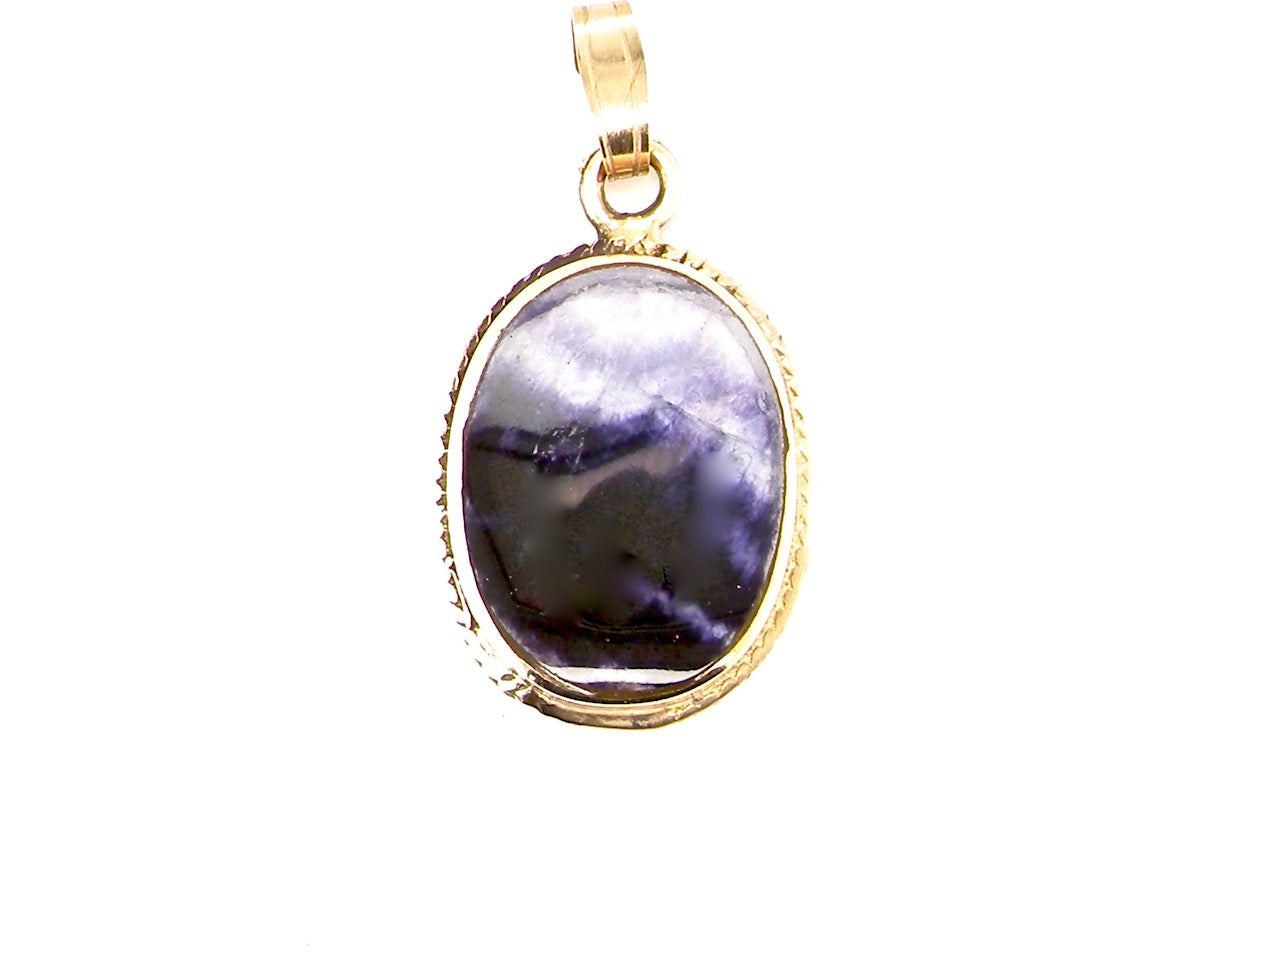 Blue John and Sterling Silver Small Oval Pendant Necklace - The Richard  Harvey Collection